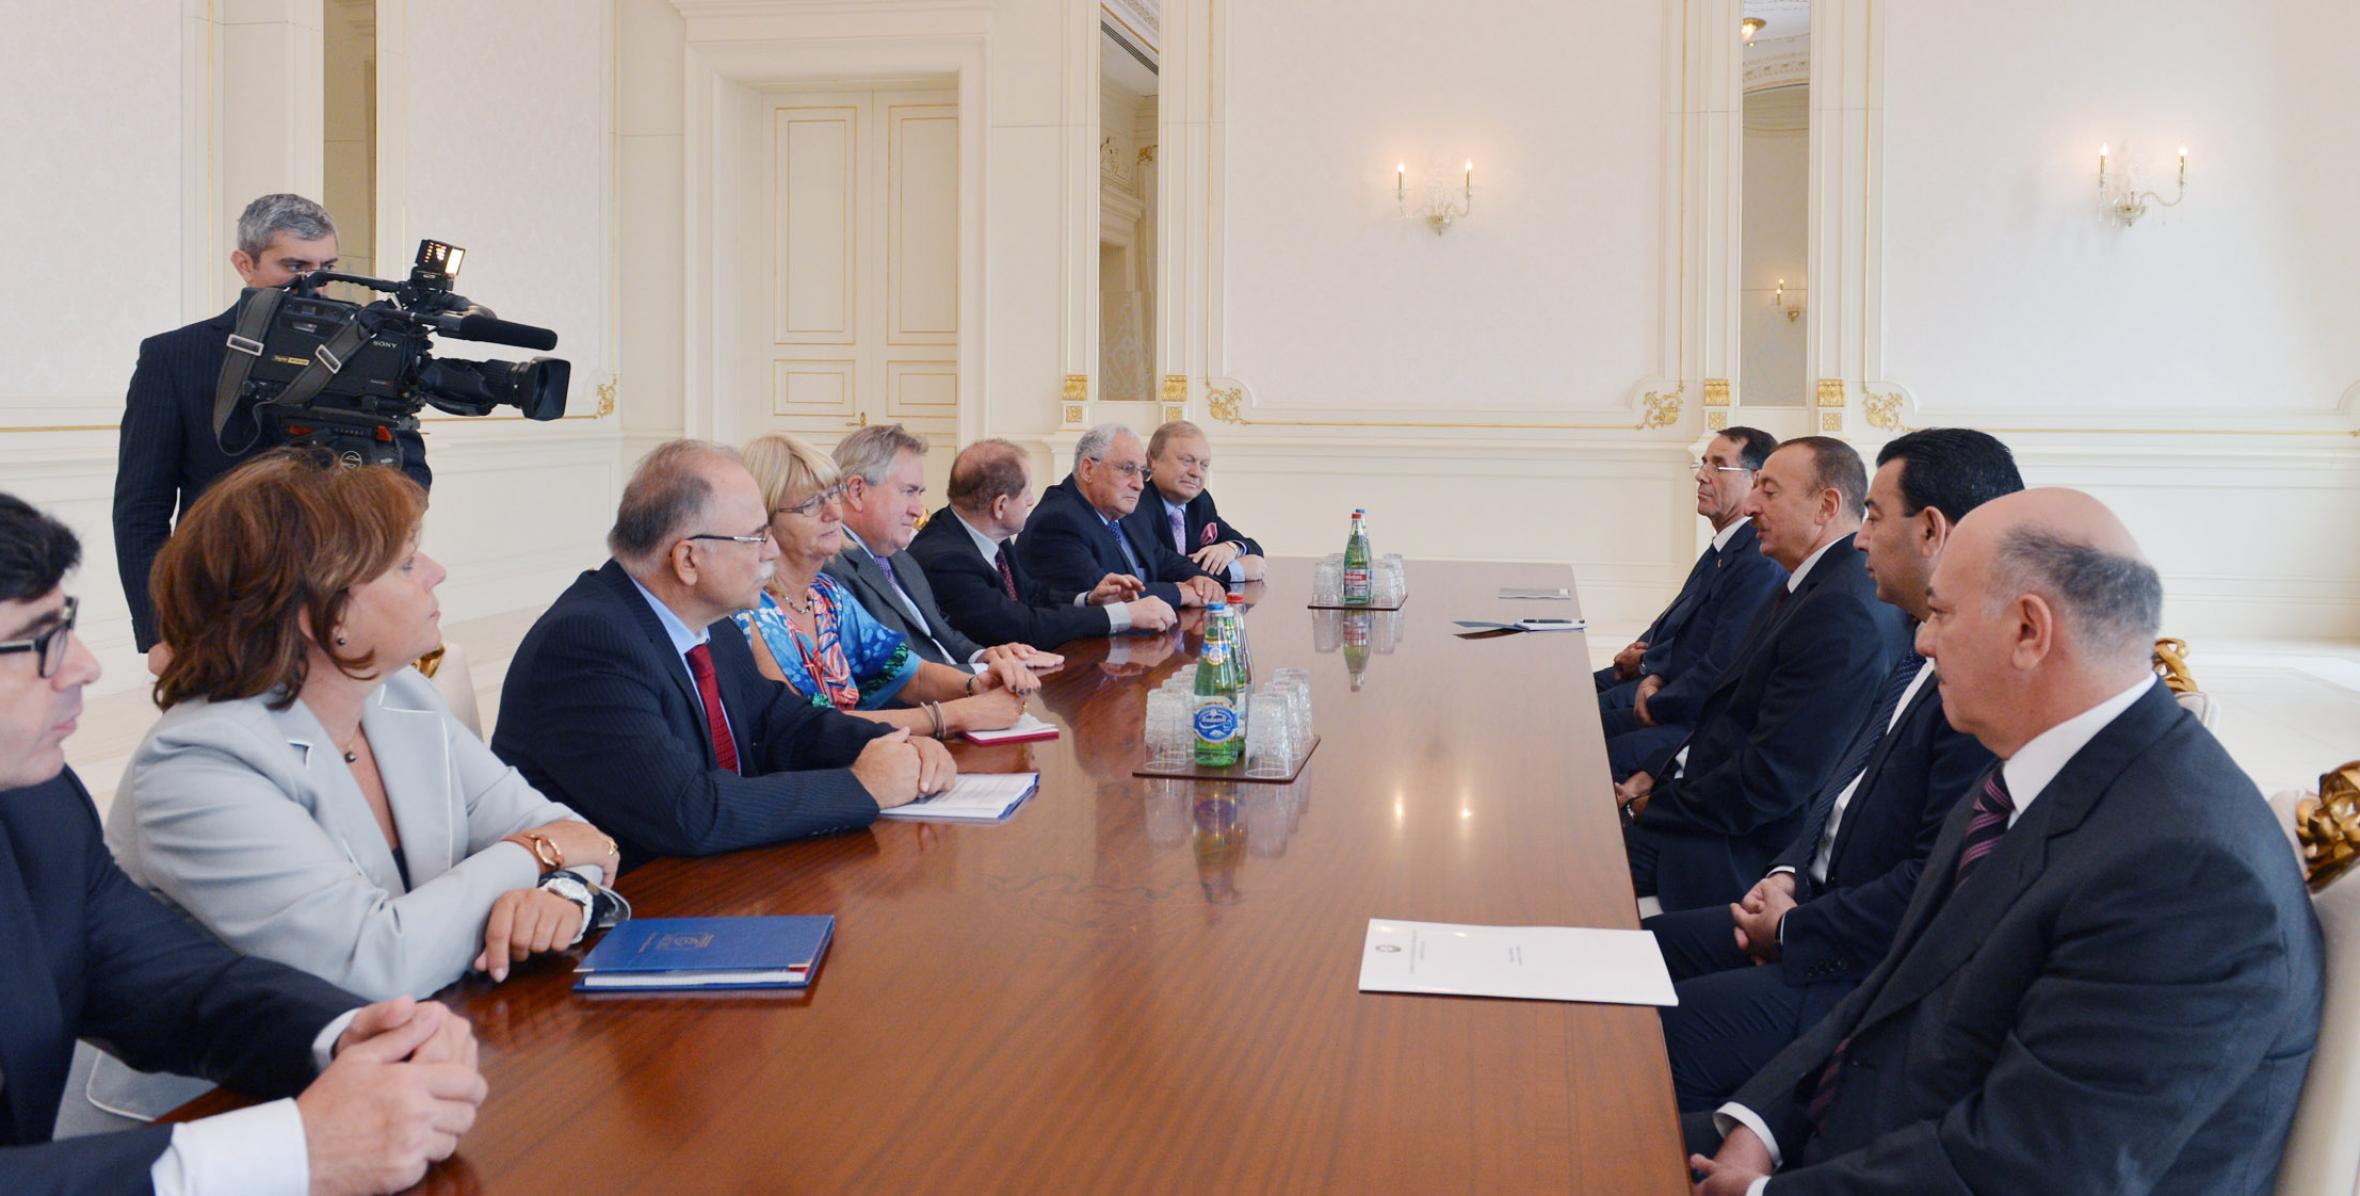 Ilham Aliyev received members of the Special Committee’s pre-election mission of the Parliamentary Assembly of the Council of Europe for the observation of the presidential election in Azerbaijan